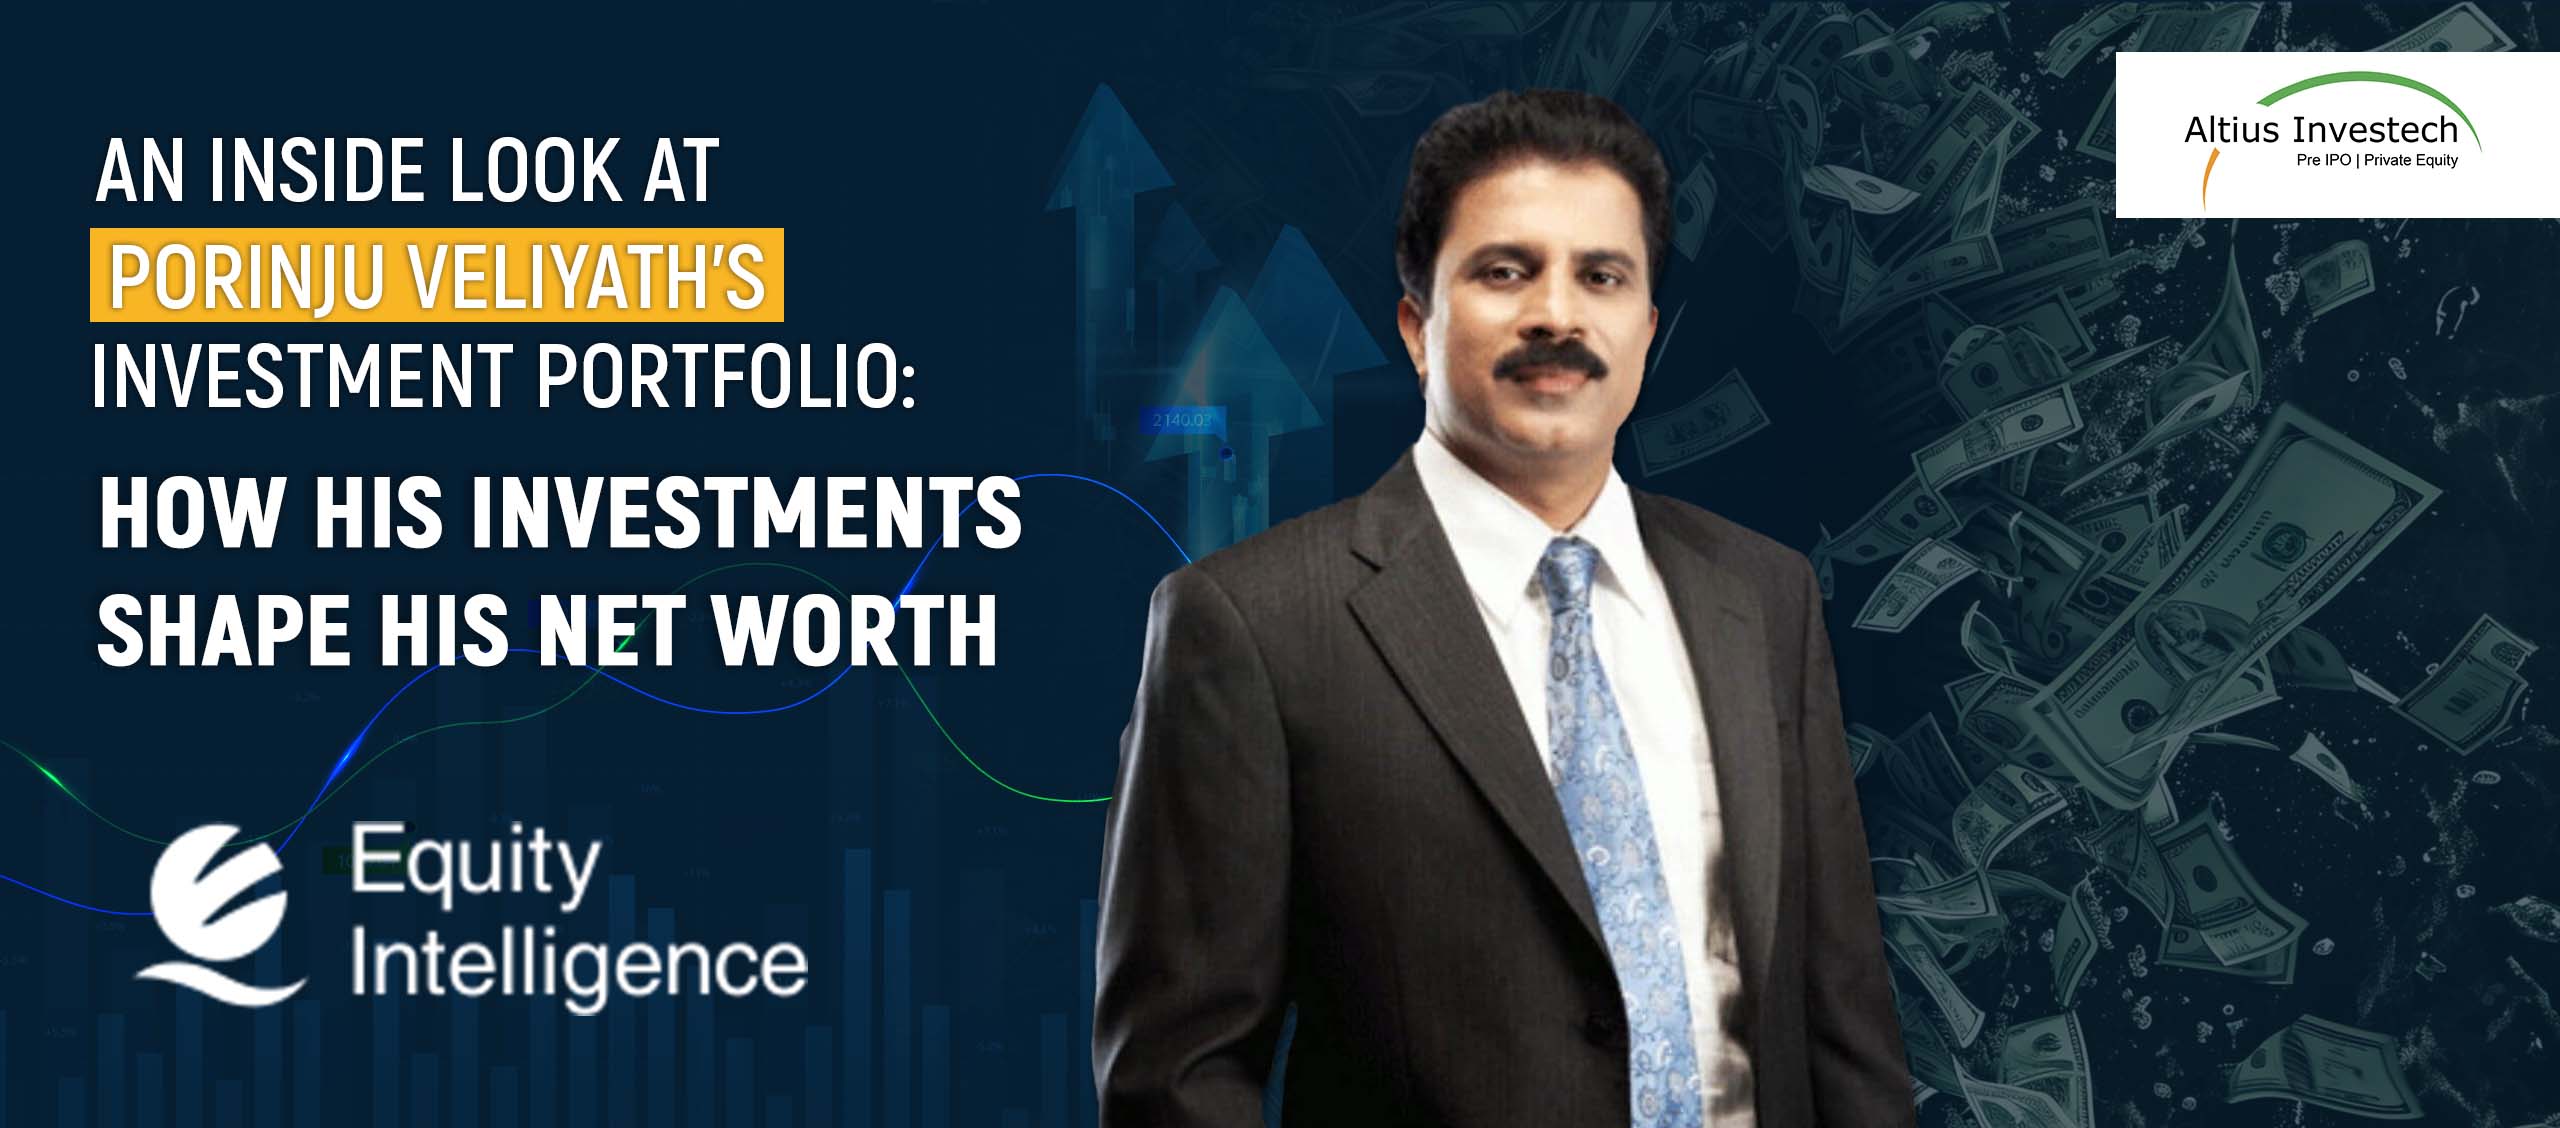 You are currently viewing An Inside Look at Porinju Veliyath’s Investment Portfolio: How His Investments Shape His Net Worth